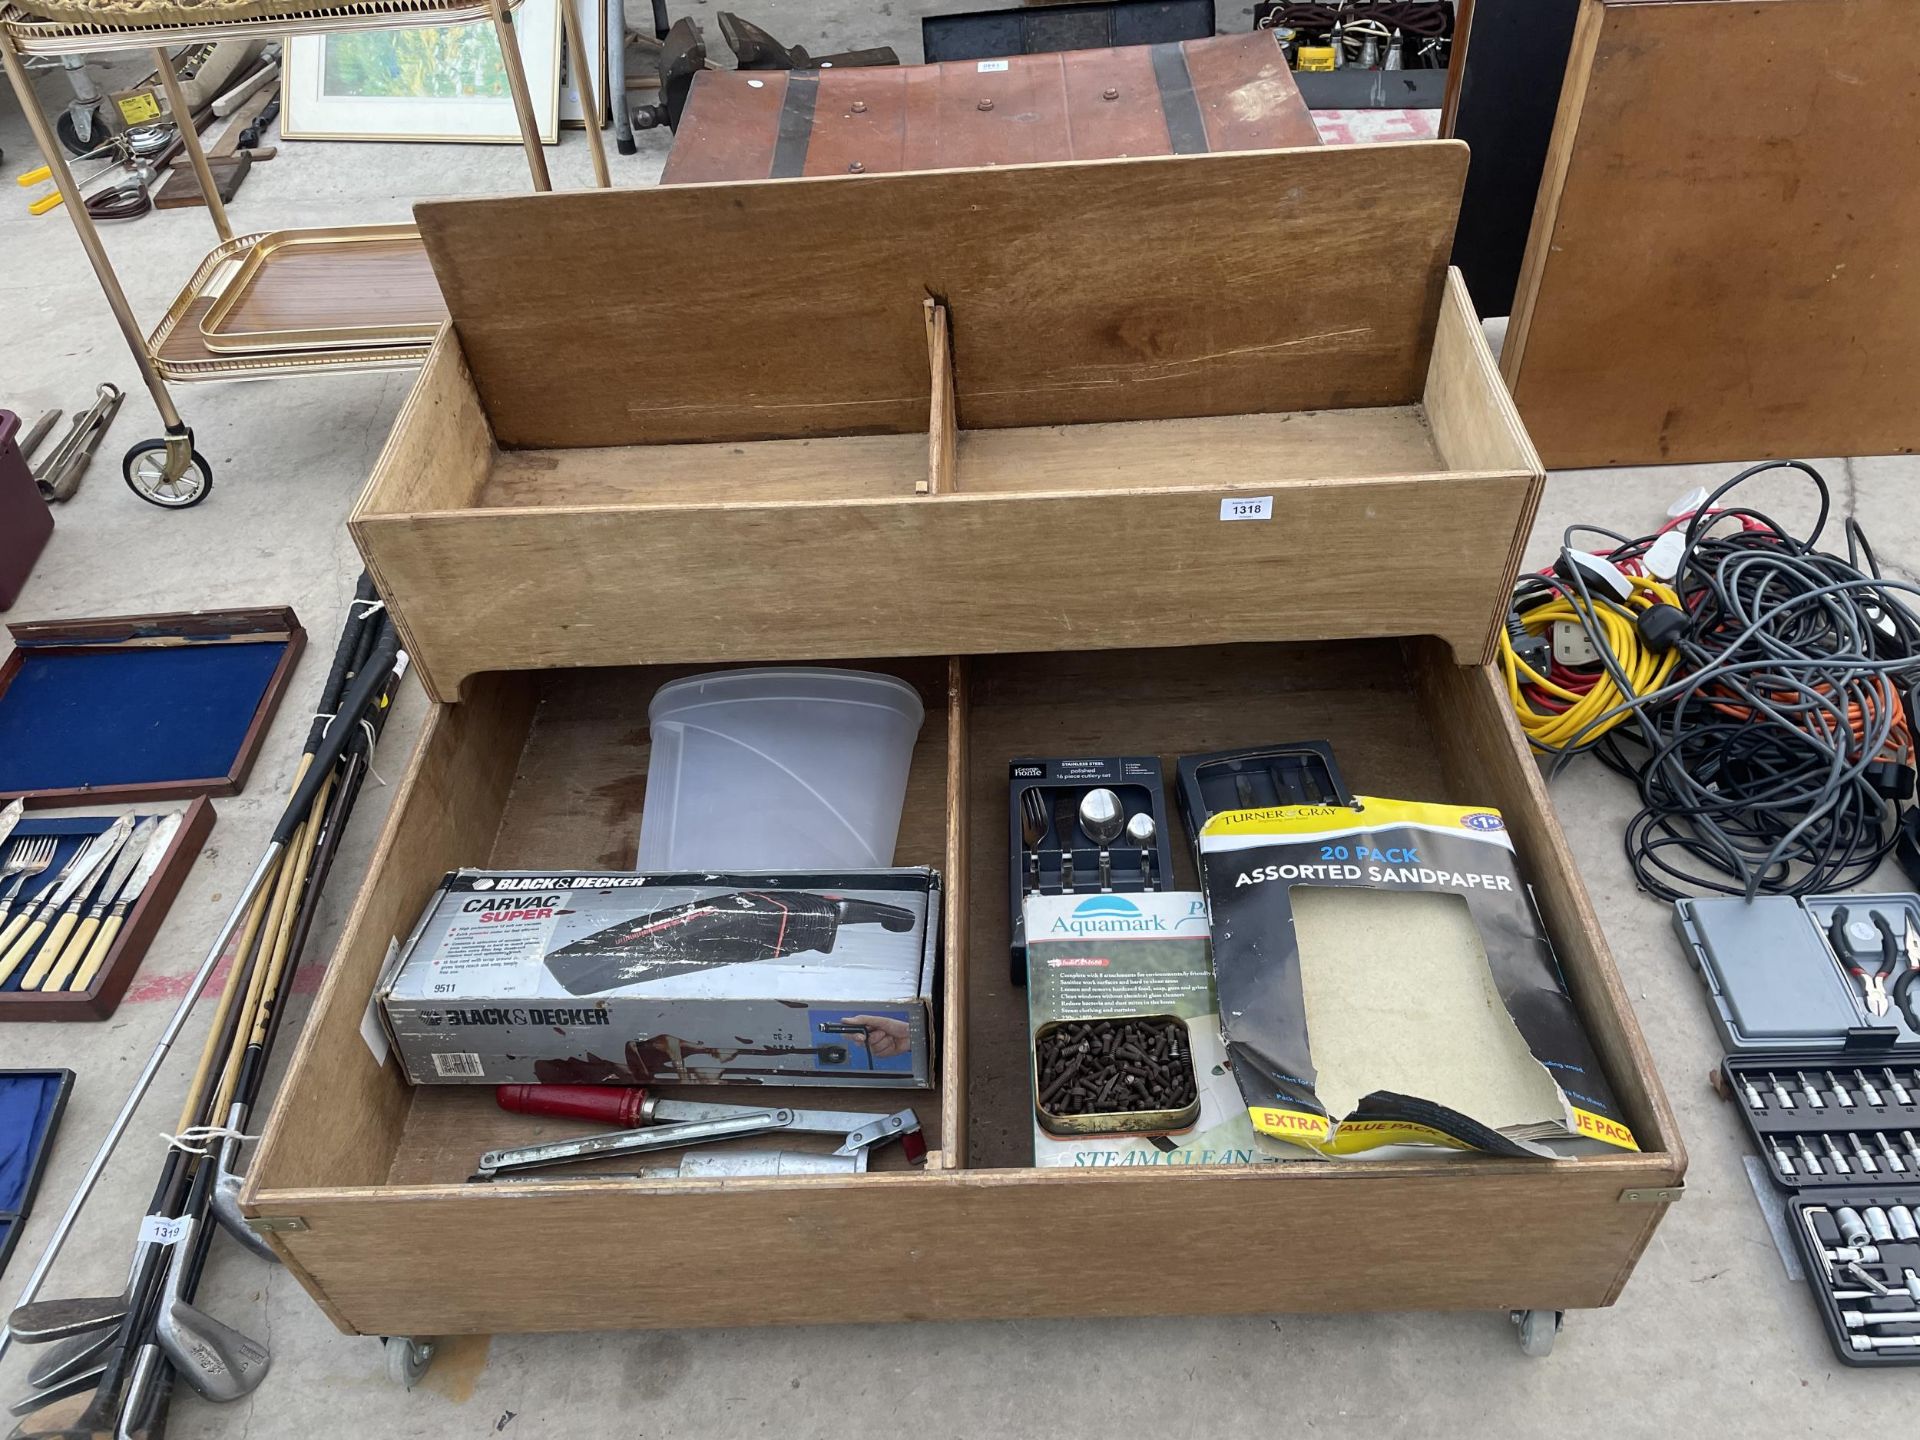 A TWO TIERED STORAGE CART AND AN ASSORTMENT OF TOOLS ETC